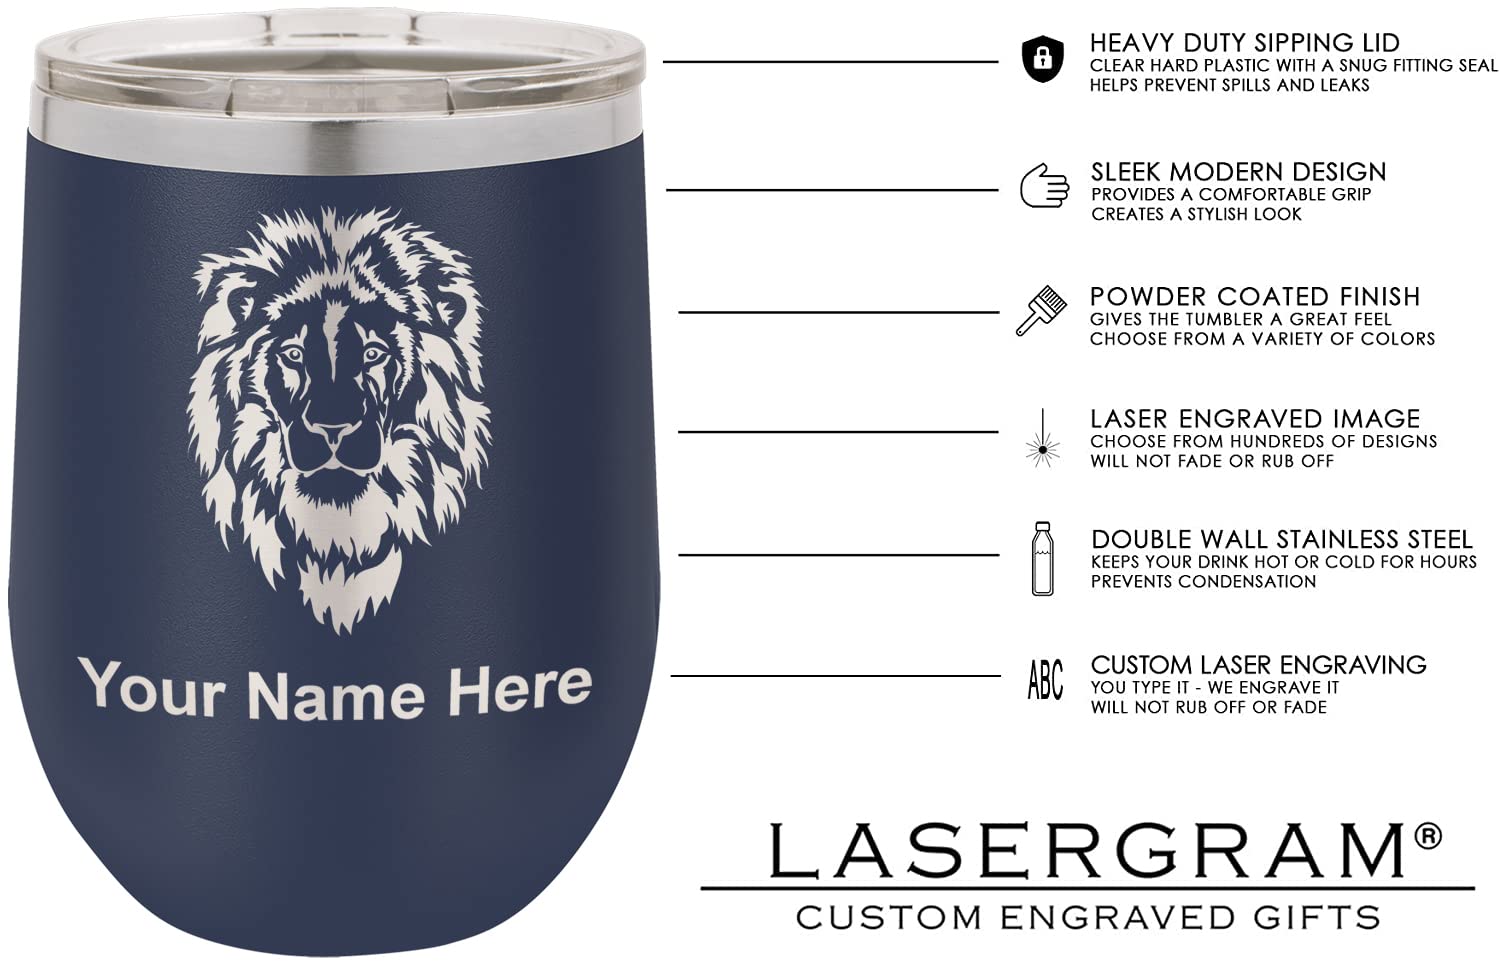 LaserGram Double Wall Stainless Steel Wine Glass Tumbler, King Crown, Personalized Engraving Included (Navy Blue)